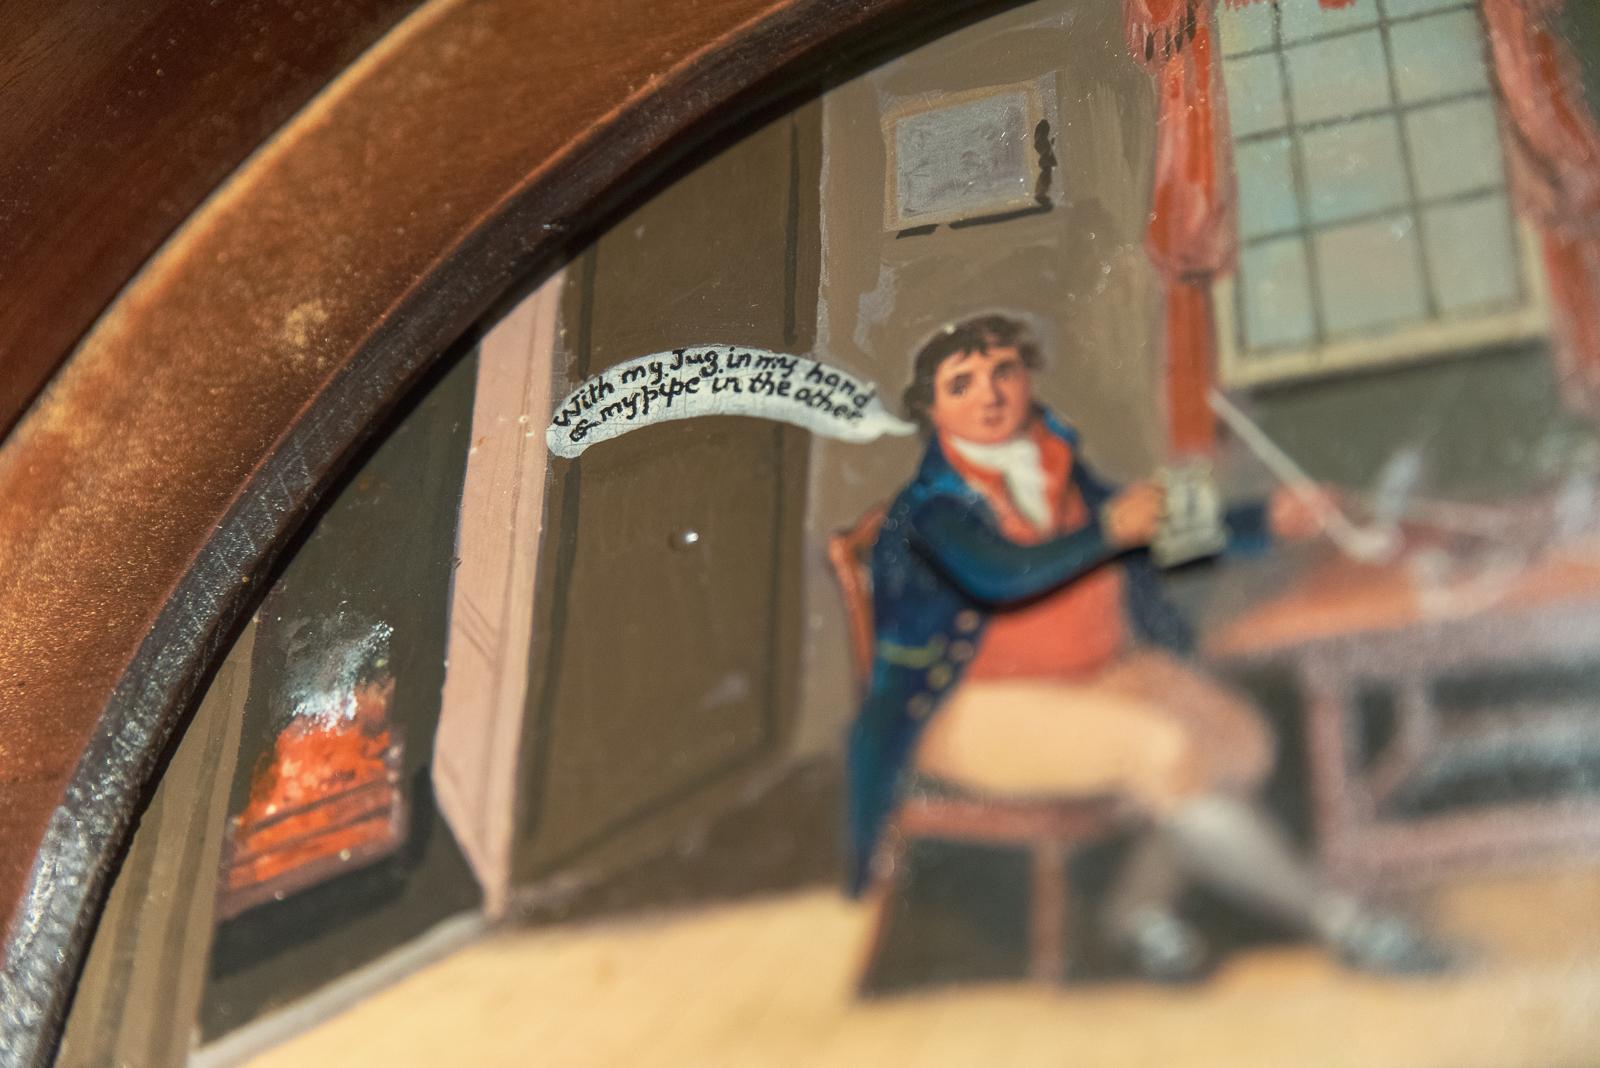 A rare and probably unique arch painted dial automata of (Man lifting his glass of beer as the clock strikes each hour). A very good 8 day movement with pretty rare dial, signed by the maker - Jones of Chalford, Gloucestershire (recorded 1761-1804).